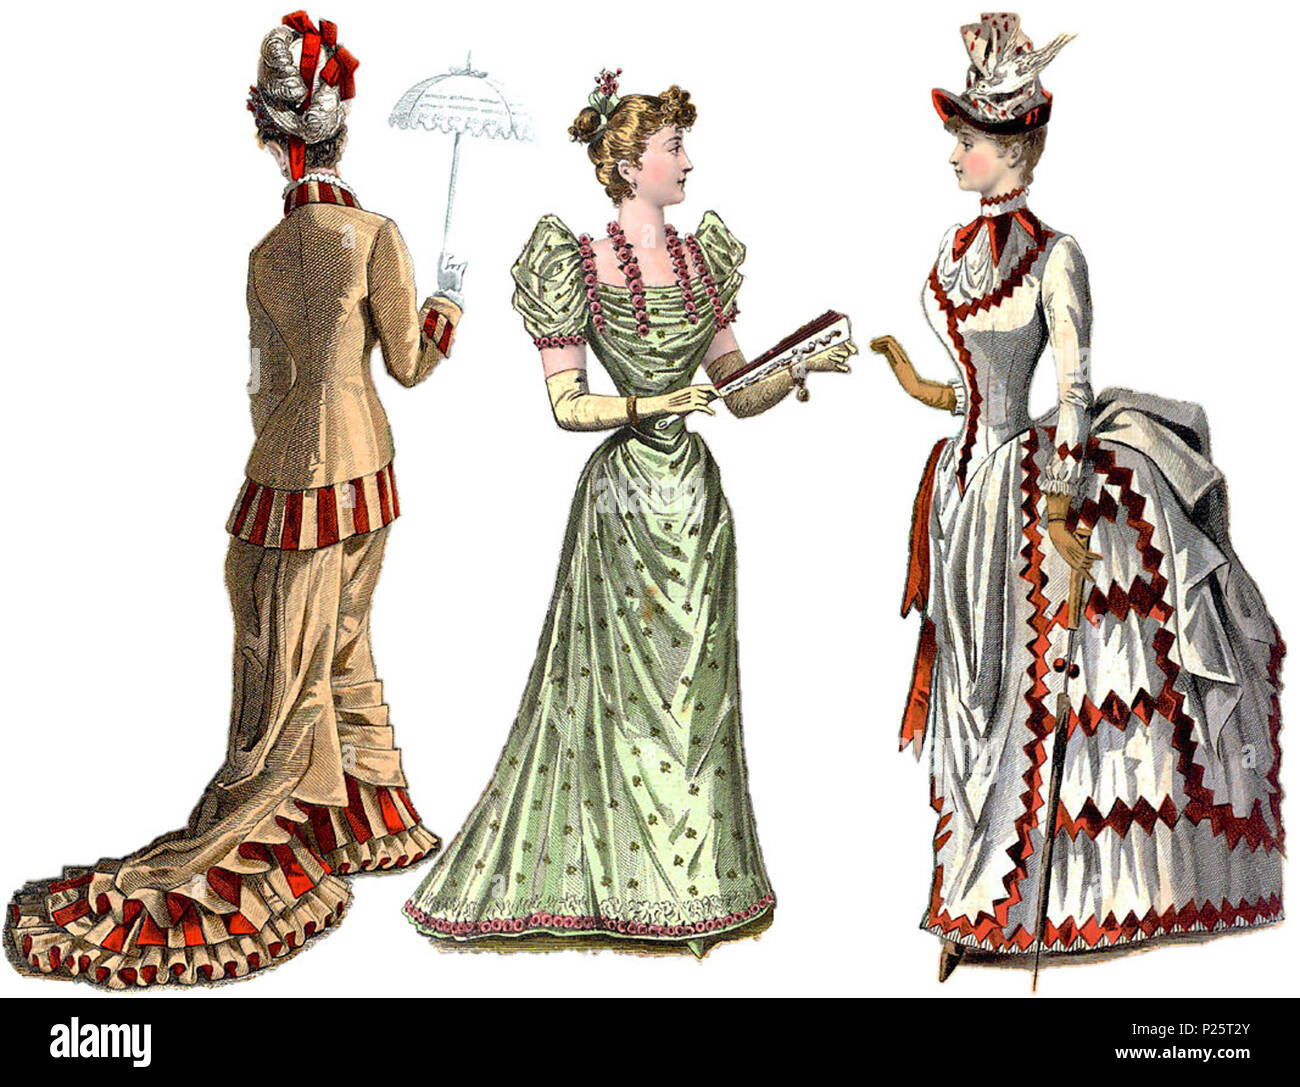 Style overview taken from 1880s fashion plates (a composite of what were  originally parts of three separate plates) Left: early 1880's daywear  (continuing the tight dress styles of the late 1870's,